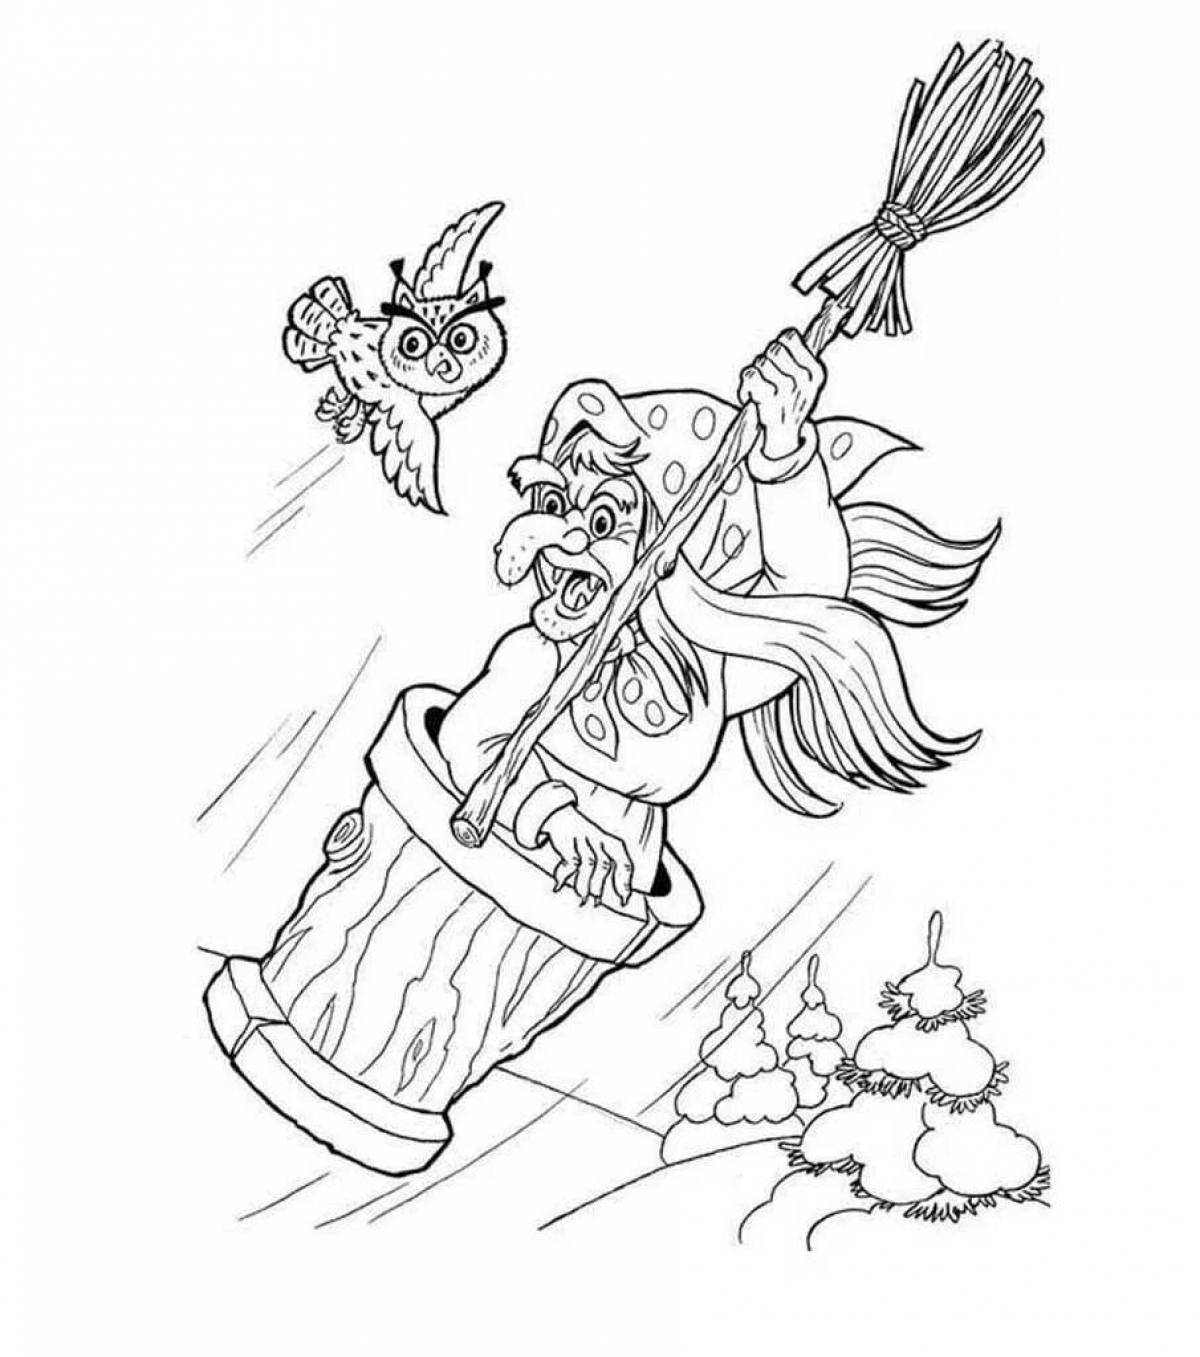 Funny baba yaga coloring book for children 4-5 years old